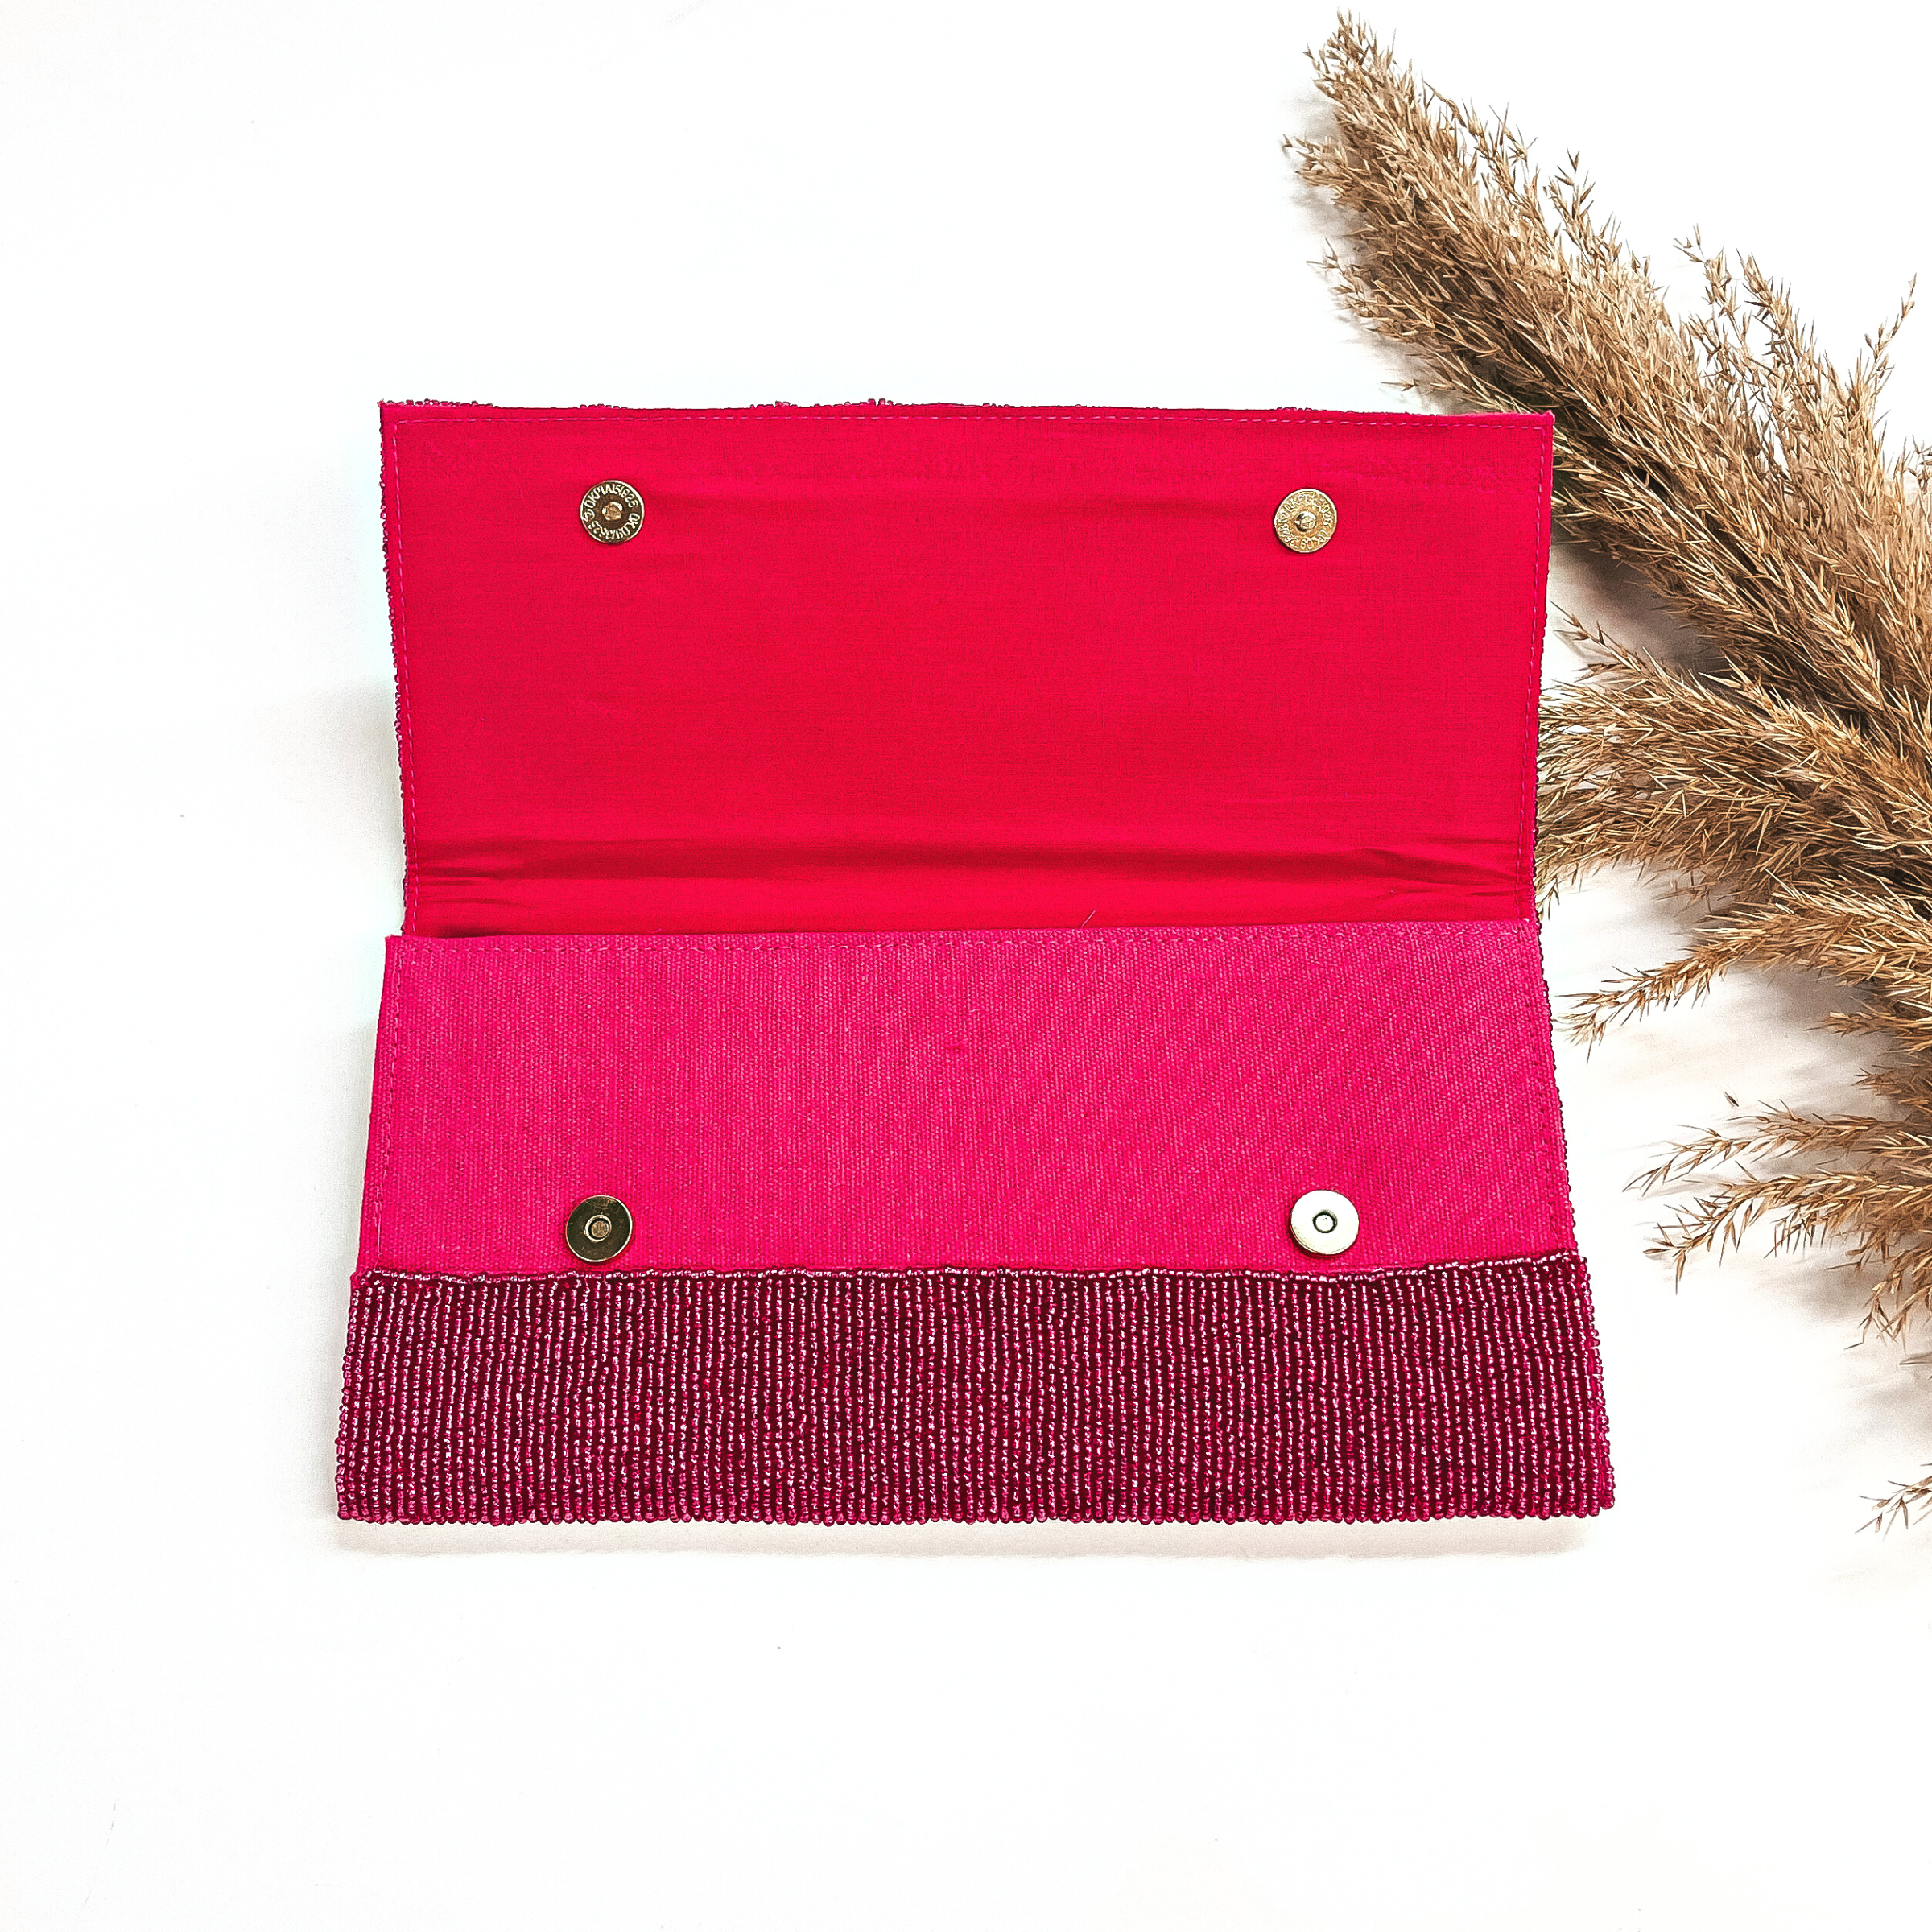 This is the inside of the seedbeaded clutch purse in fuchsia with a pink  inside. This bag  is taken laying on a white background with a brown plant in the side as decor.